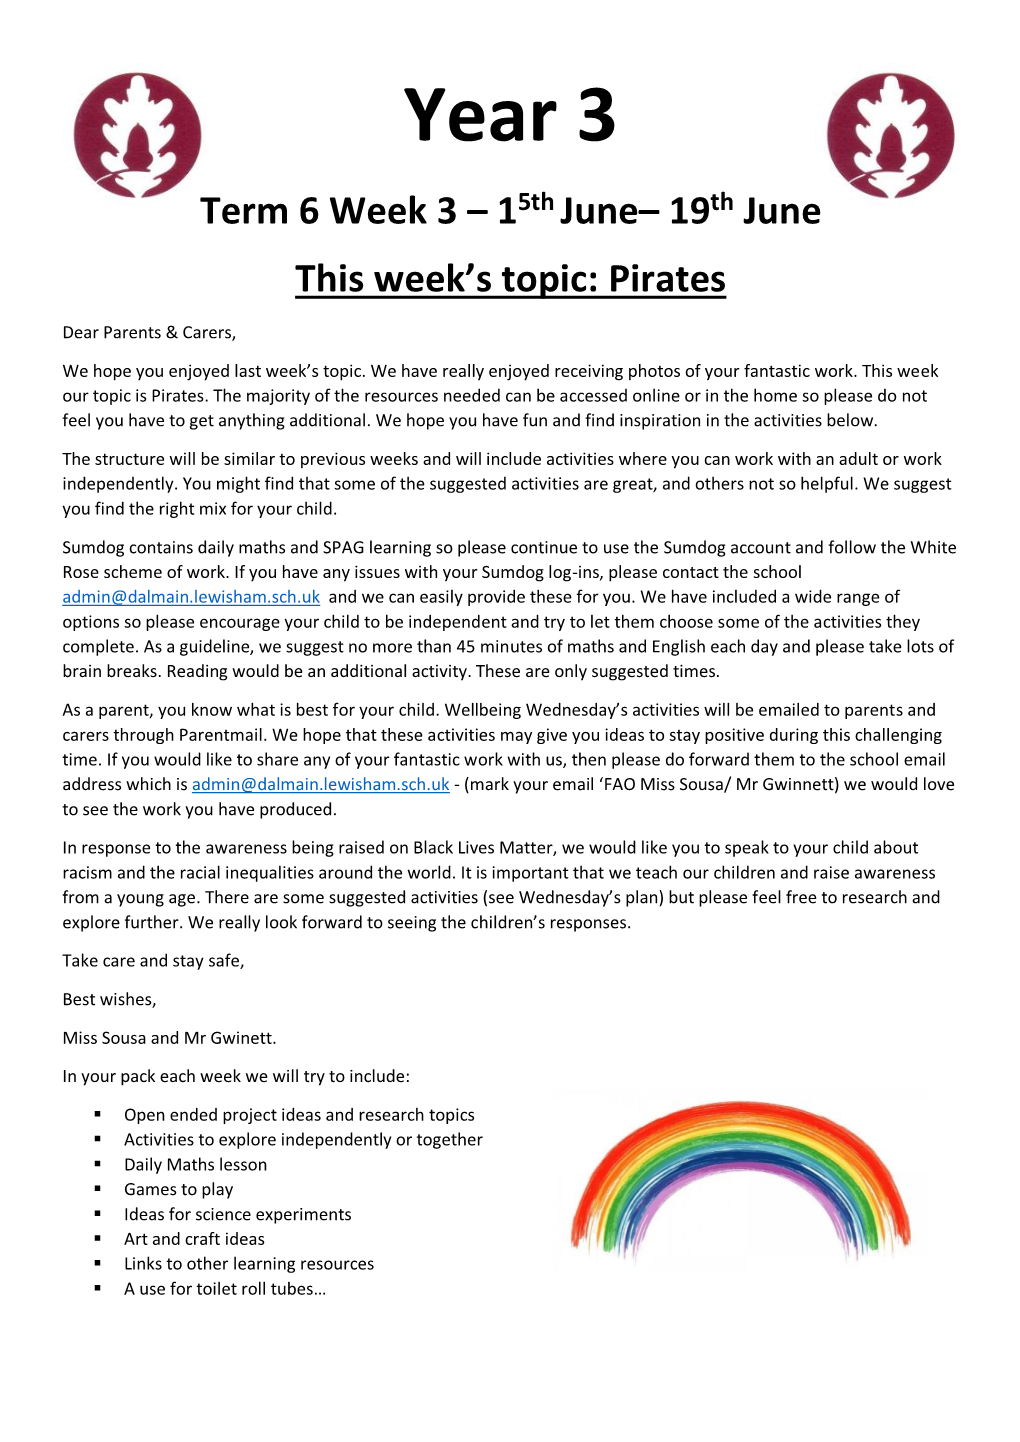 Year 3 Term 6 Week 3 – 15Th June– 19Th June This Week’S Topic: Pirates